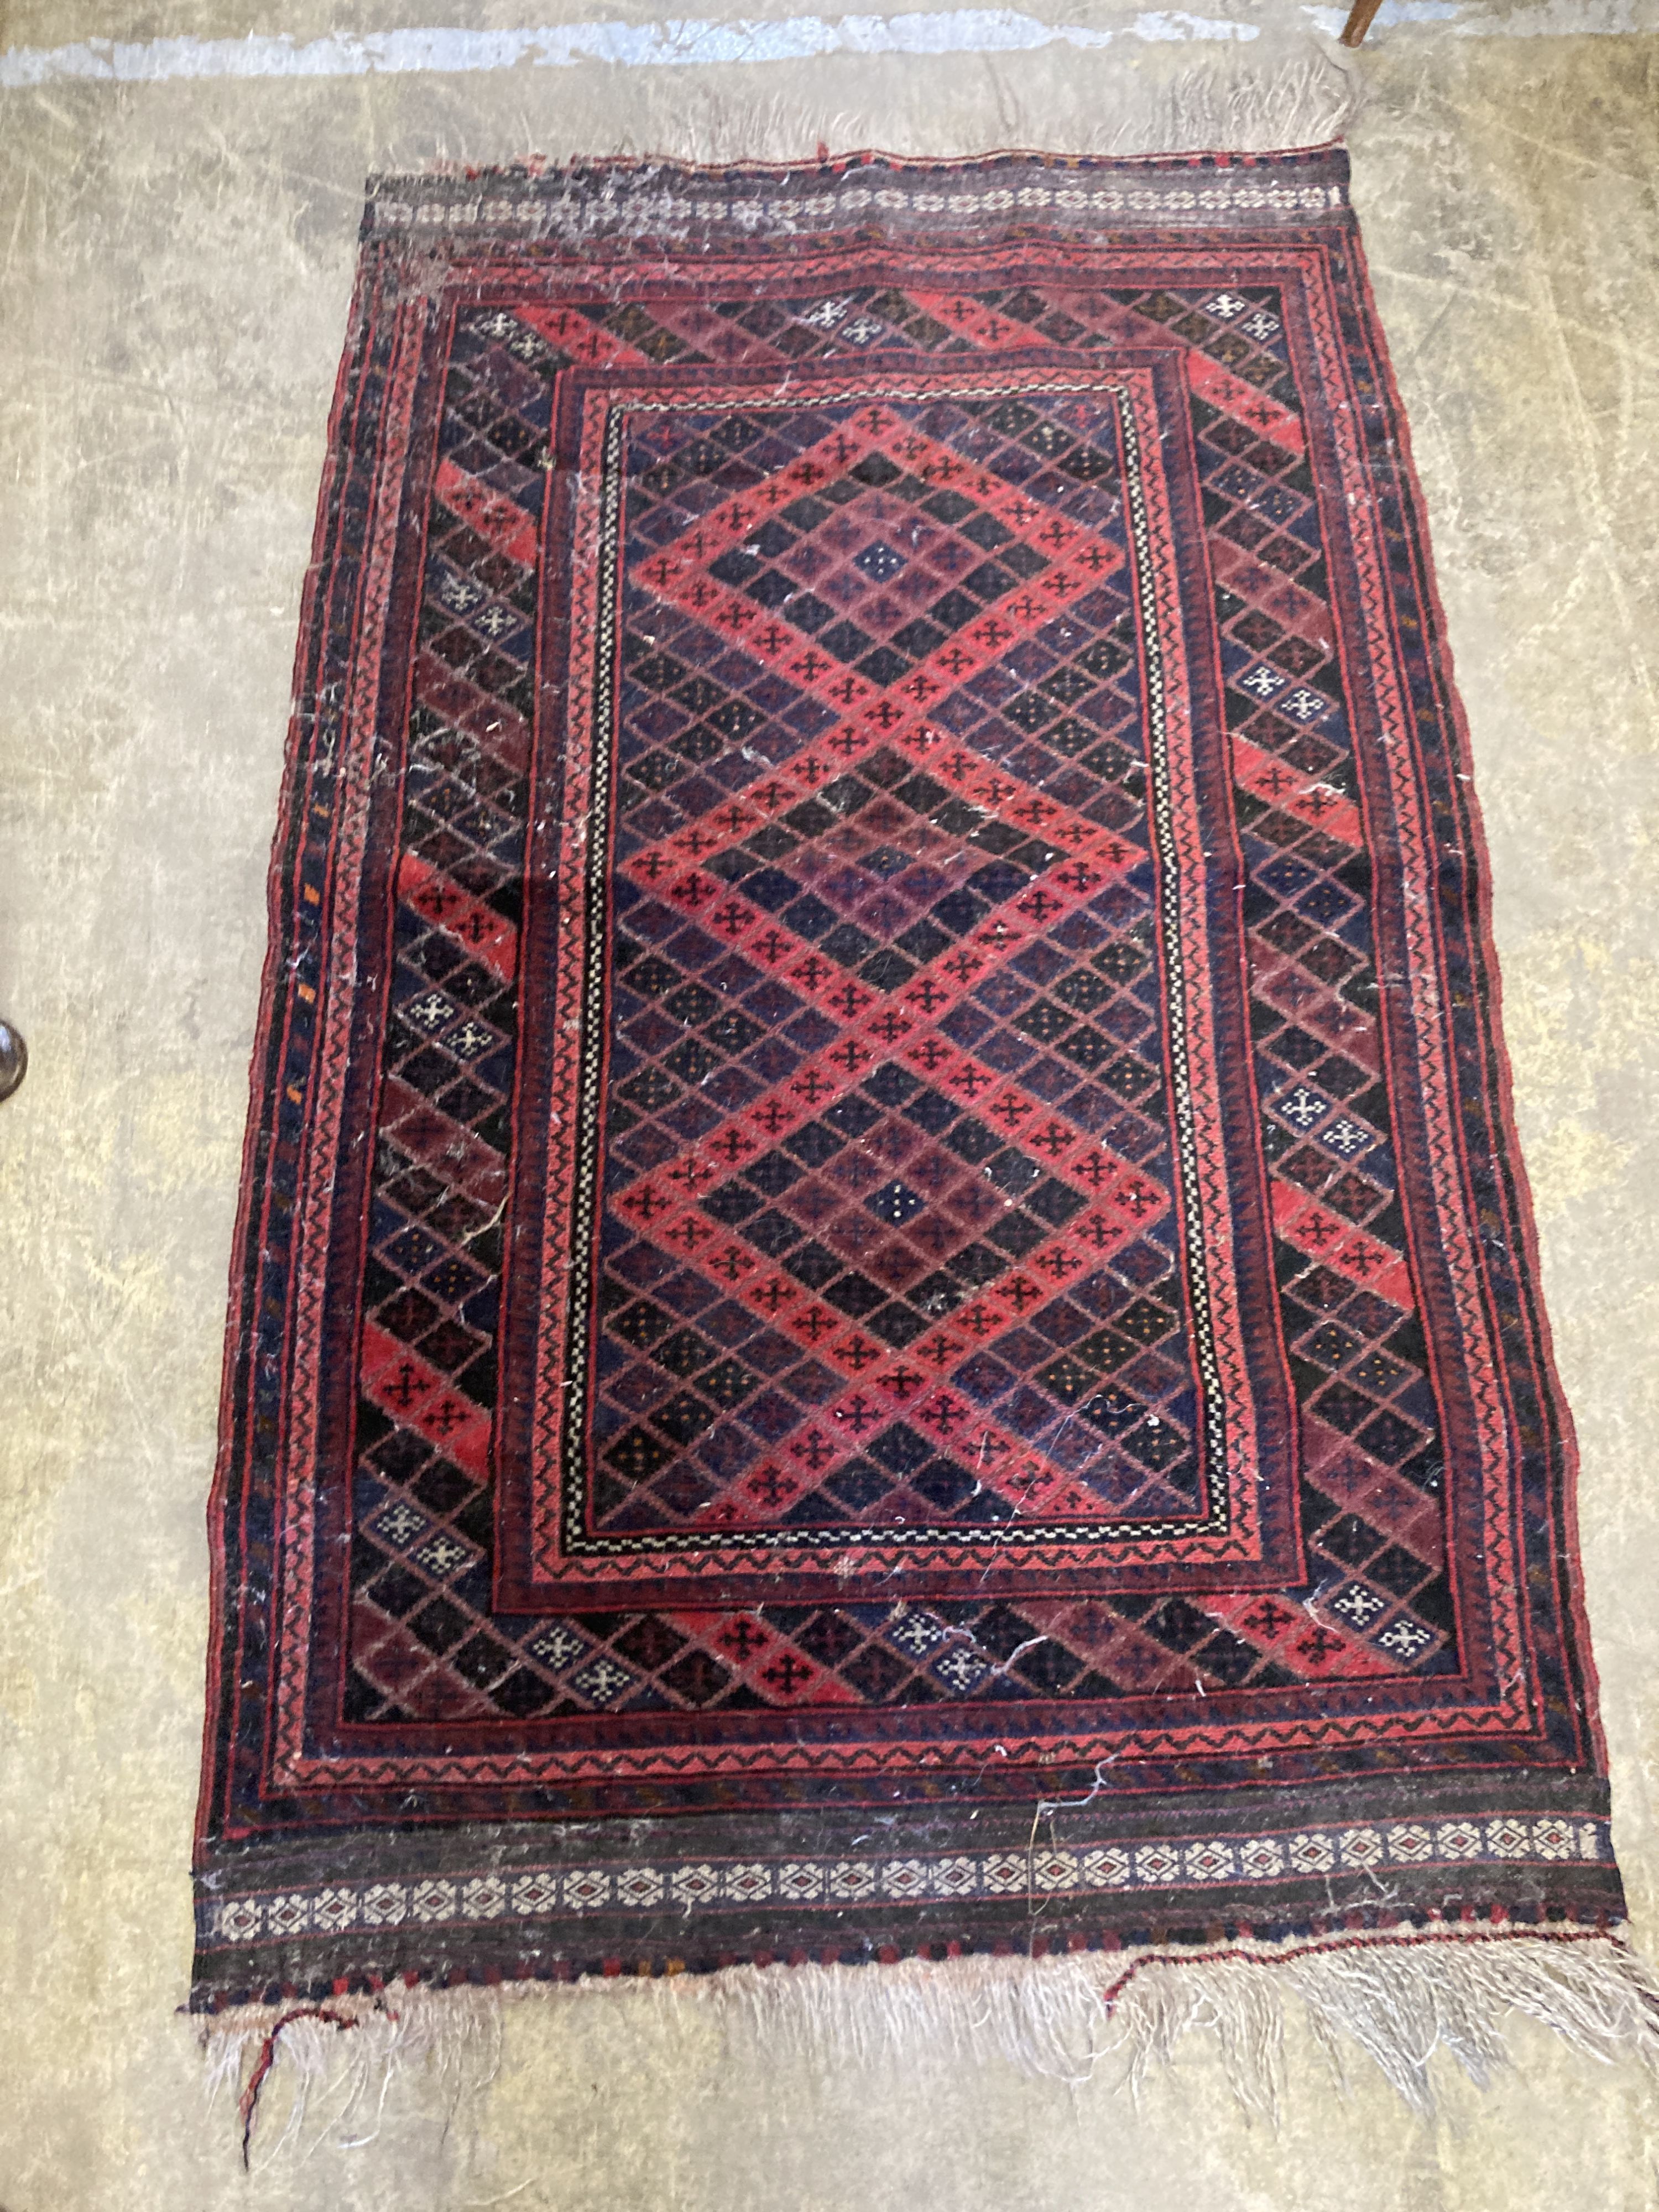 Two small Belouchi red ground rugs and two Kilim style rugs, 112 x 92.5cm and similar - Image 4 of 5